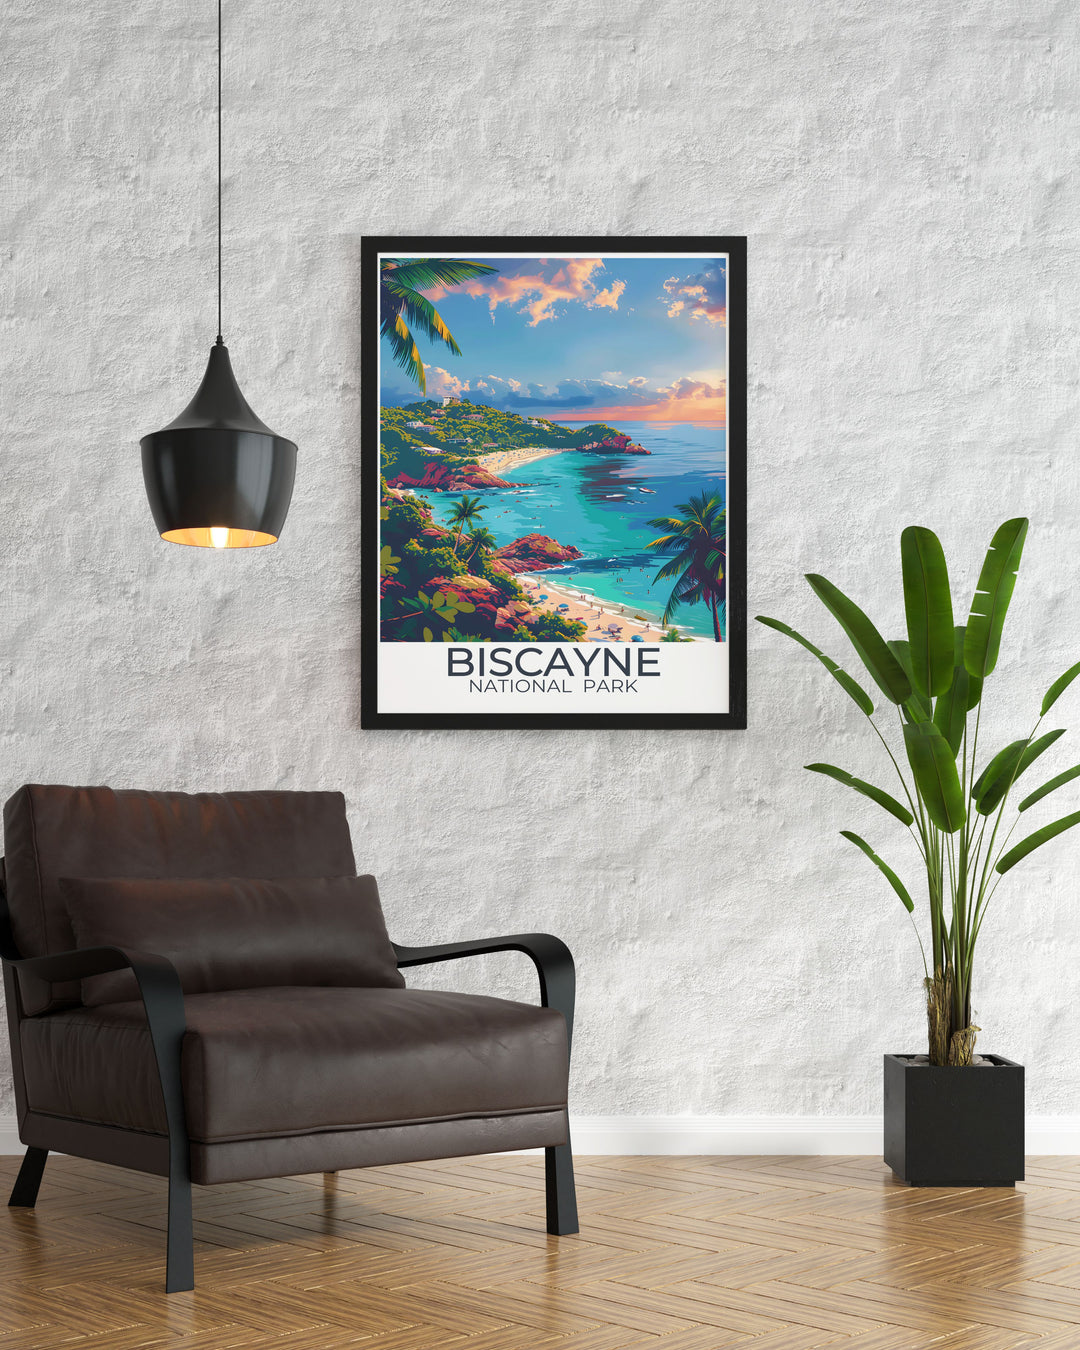 Elegant Biscayne National Park wall art depicting Elliot Key Trail and coral reefs, showcasing the parks natural and underwater beauty. Perfect for adding sophistication and a touch of nature to any room.